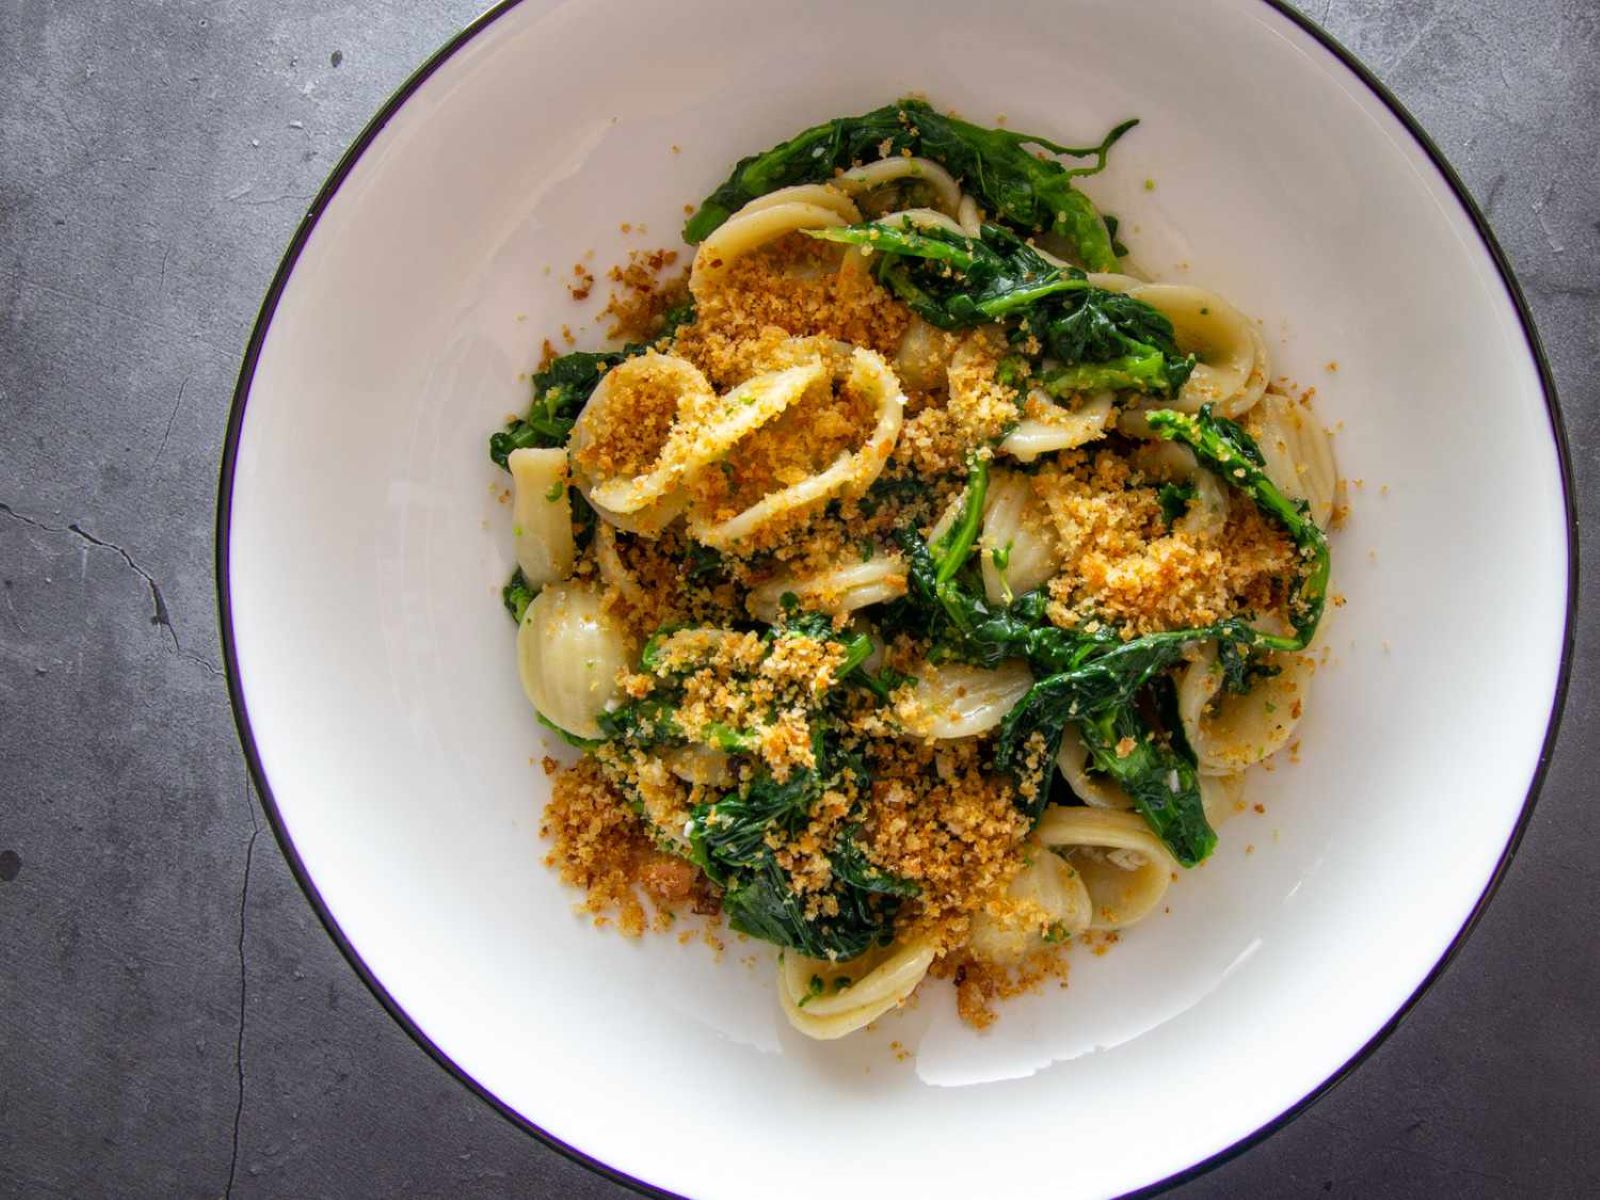 Delicious Good Friday Pasta With Anchovy And Broccoli Rabe